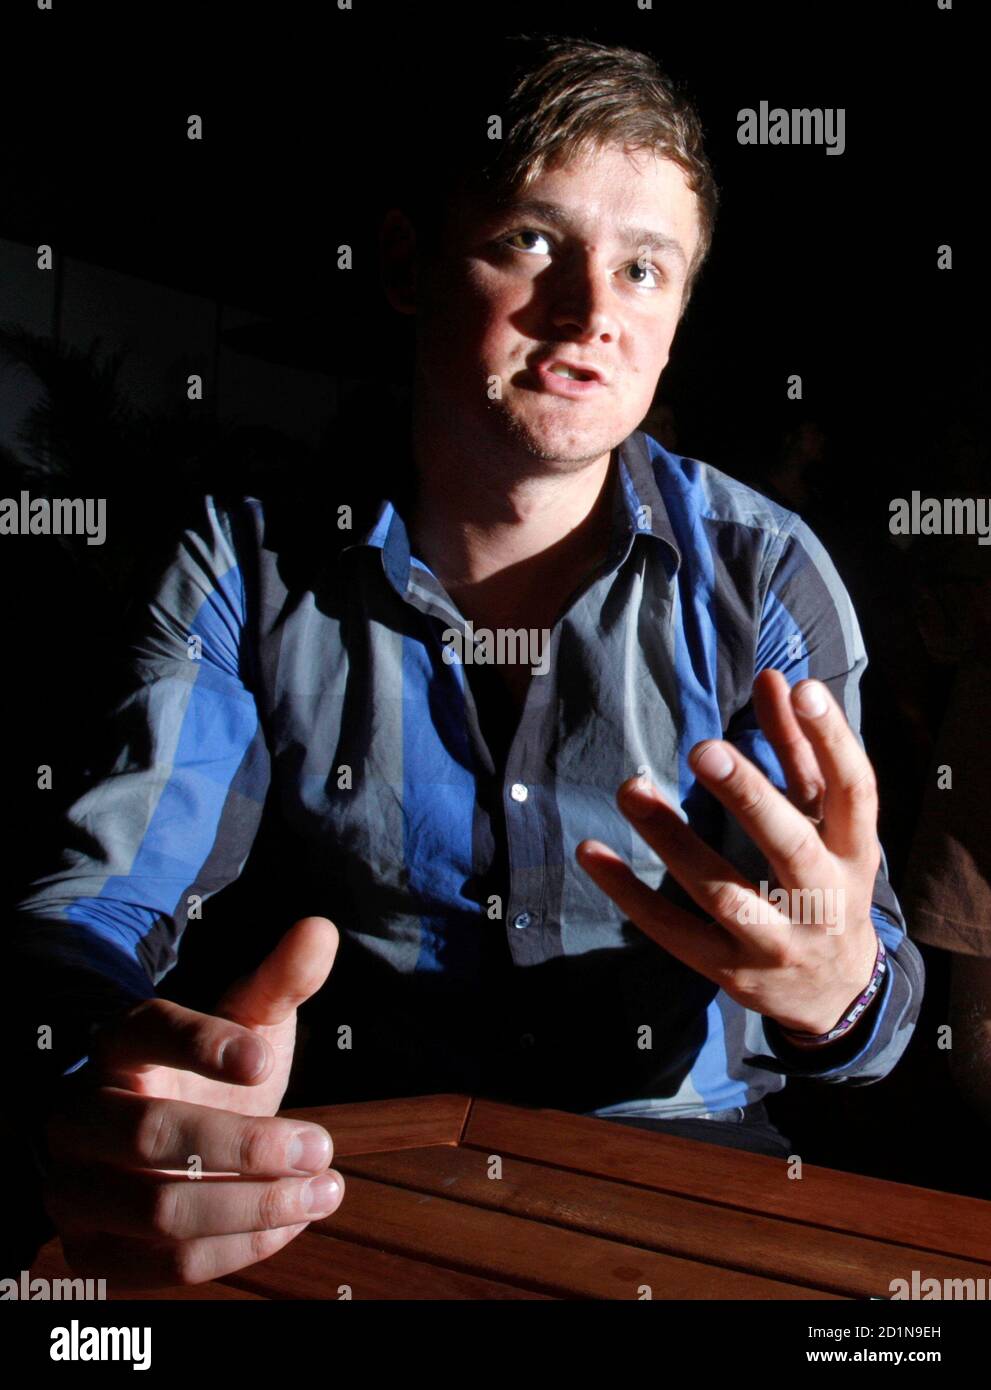 Singer of British band Keane, Tom Chaplin, speaks during an interview at  Summer Sonic 2009 music festival in Chiba, east of Tokyo August 9, 2009. An  earthquake and typhoon rains failed to